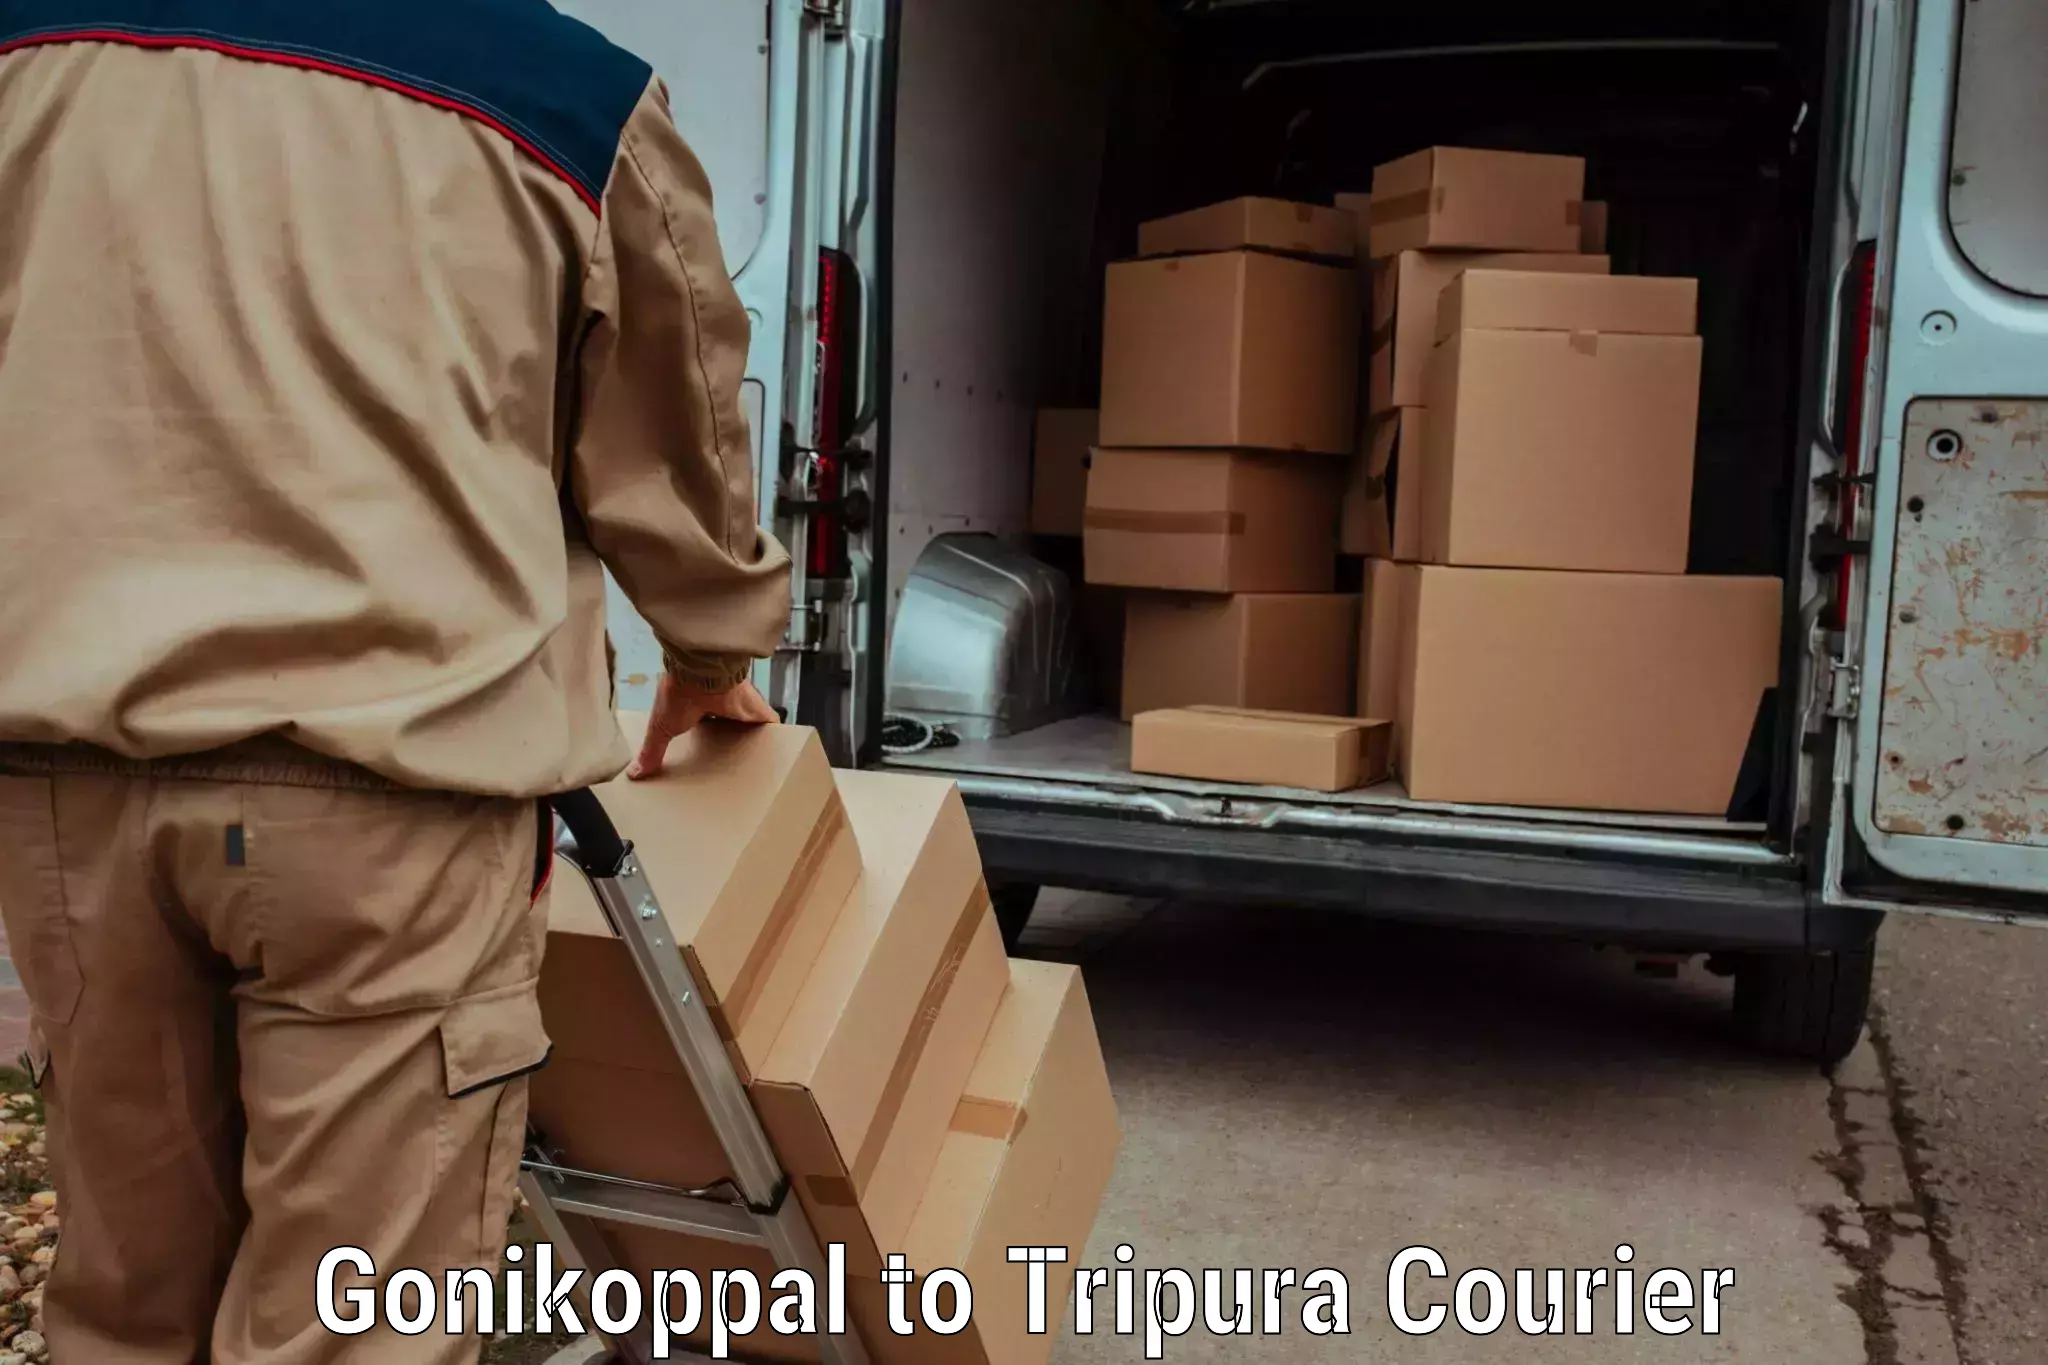 High-capacity shipping options Gonikoppal to Udaipur Tripura